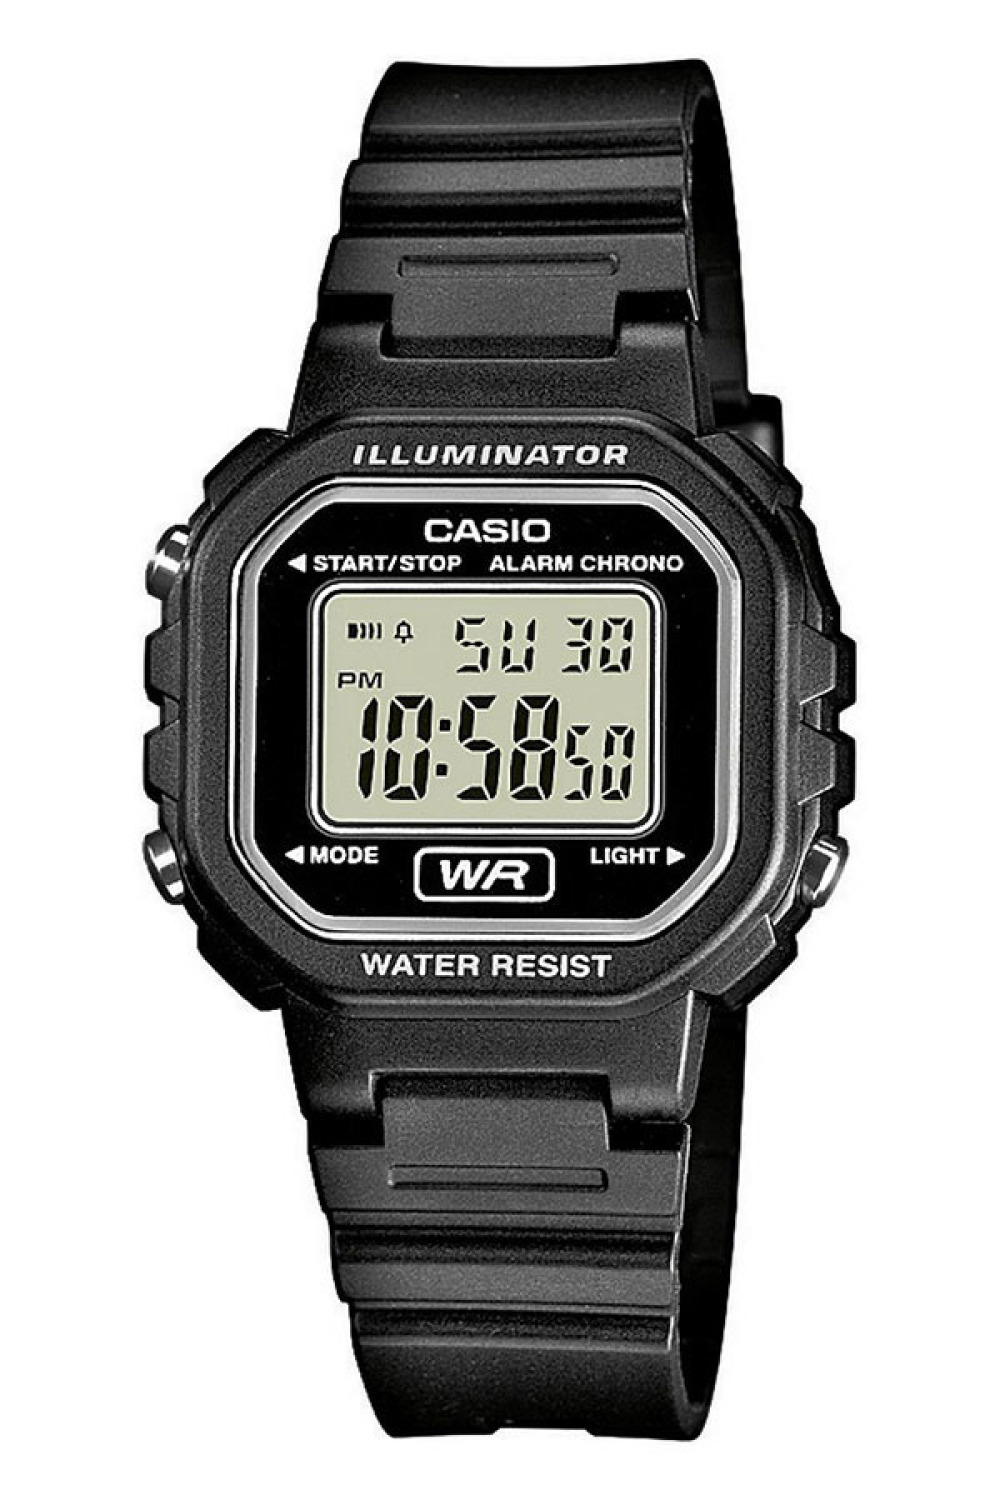 Casio Digital La wh 1adf Black Rubber Strap Women S Watch Review And Price